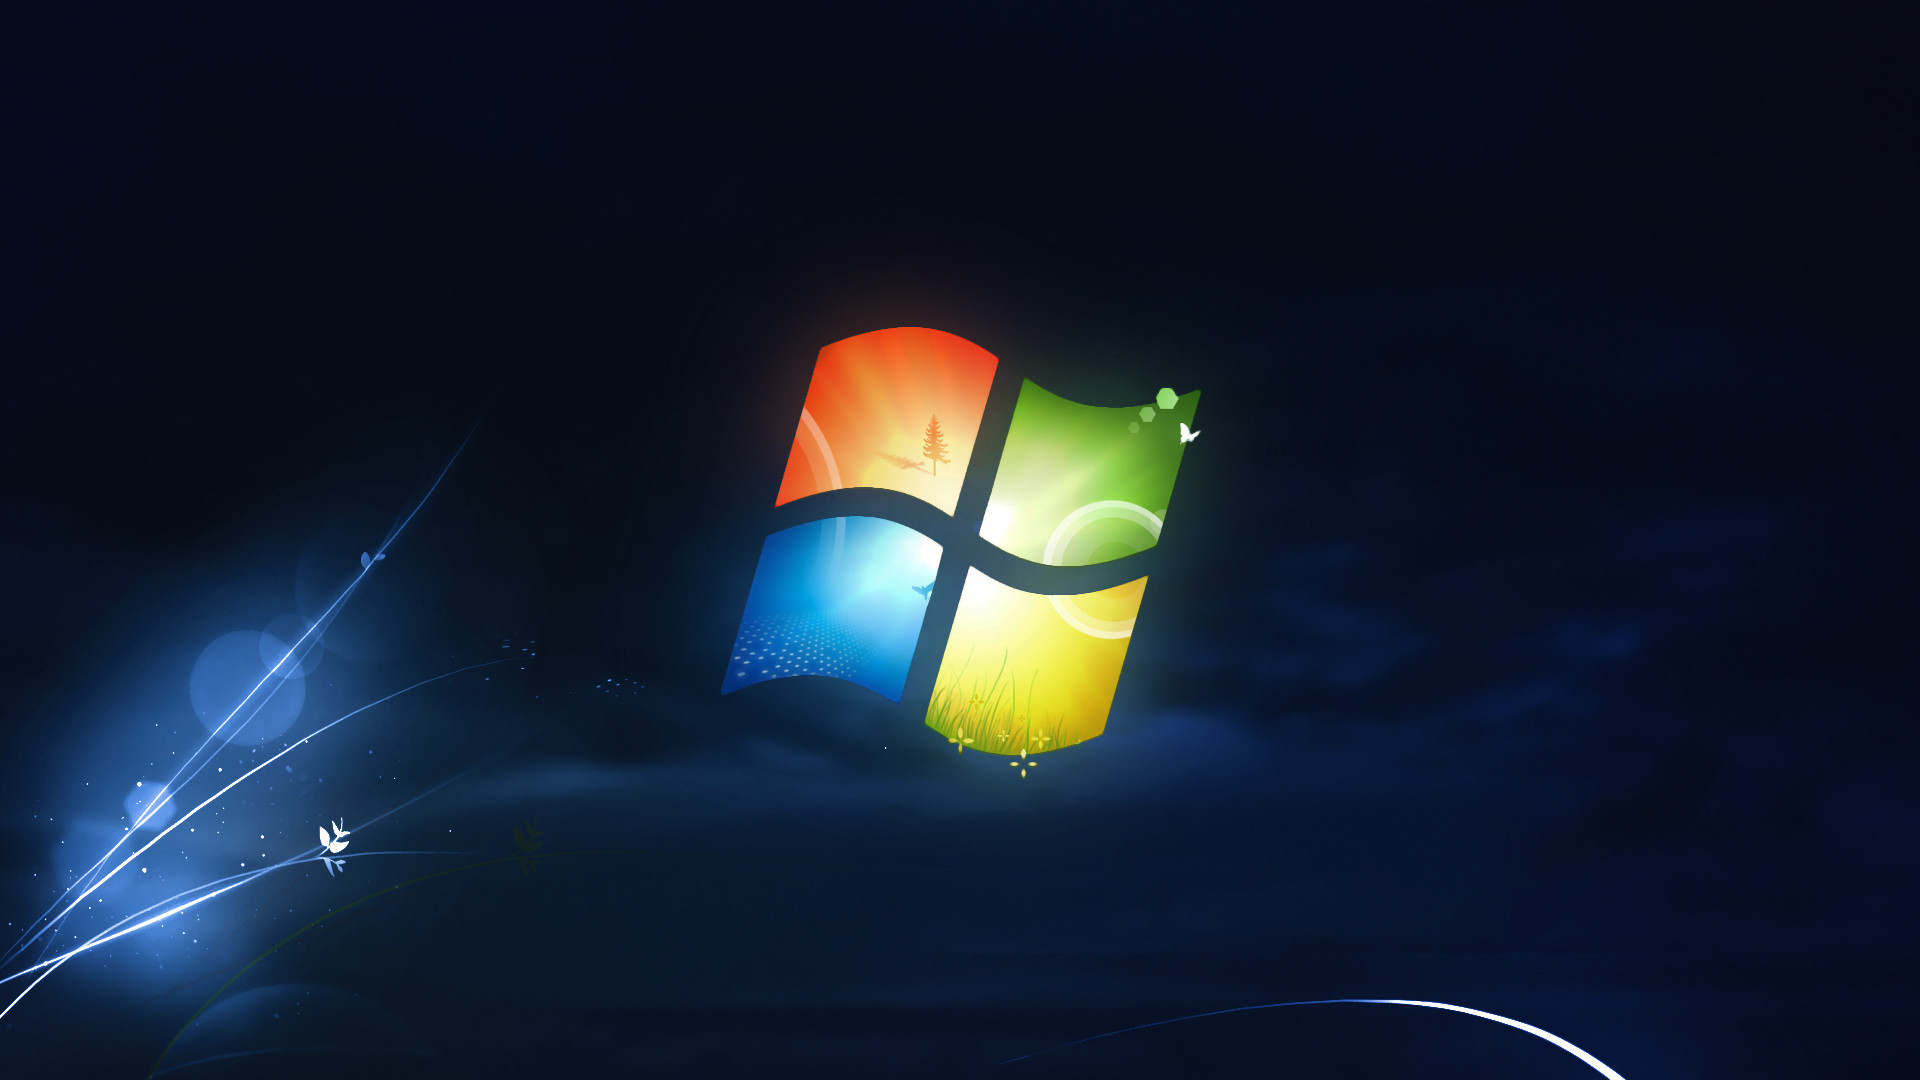 Microsoft Wallpapers Backgrounds themes 51 images